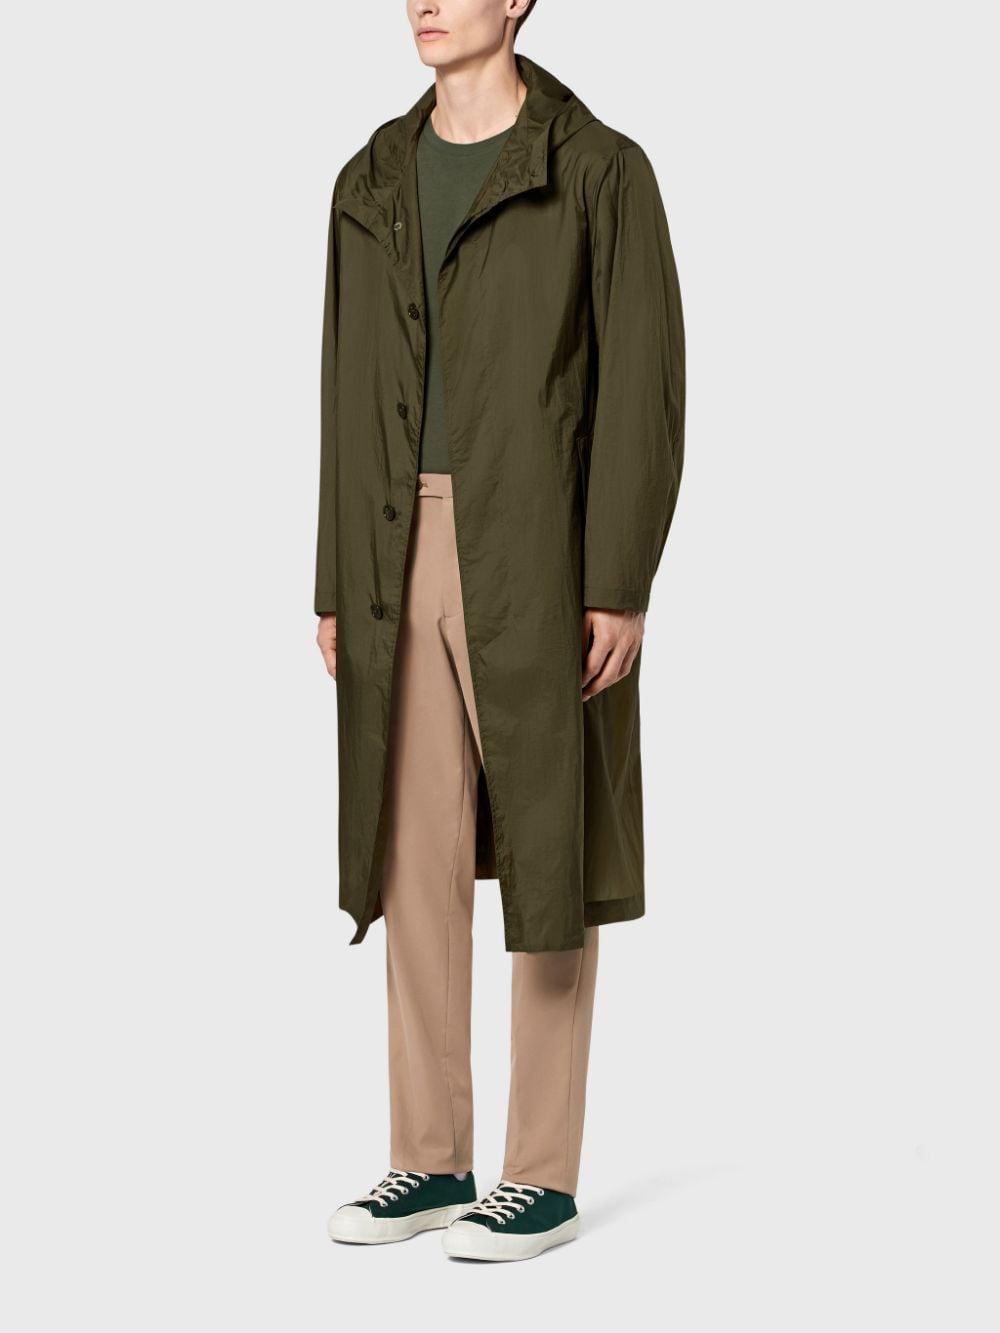 Mackintosh Synthetic Oversized Hooded Raincoat in Green for Men - Lyst